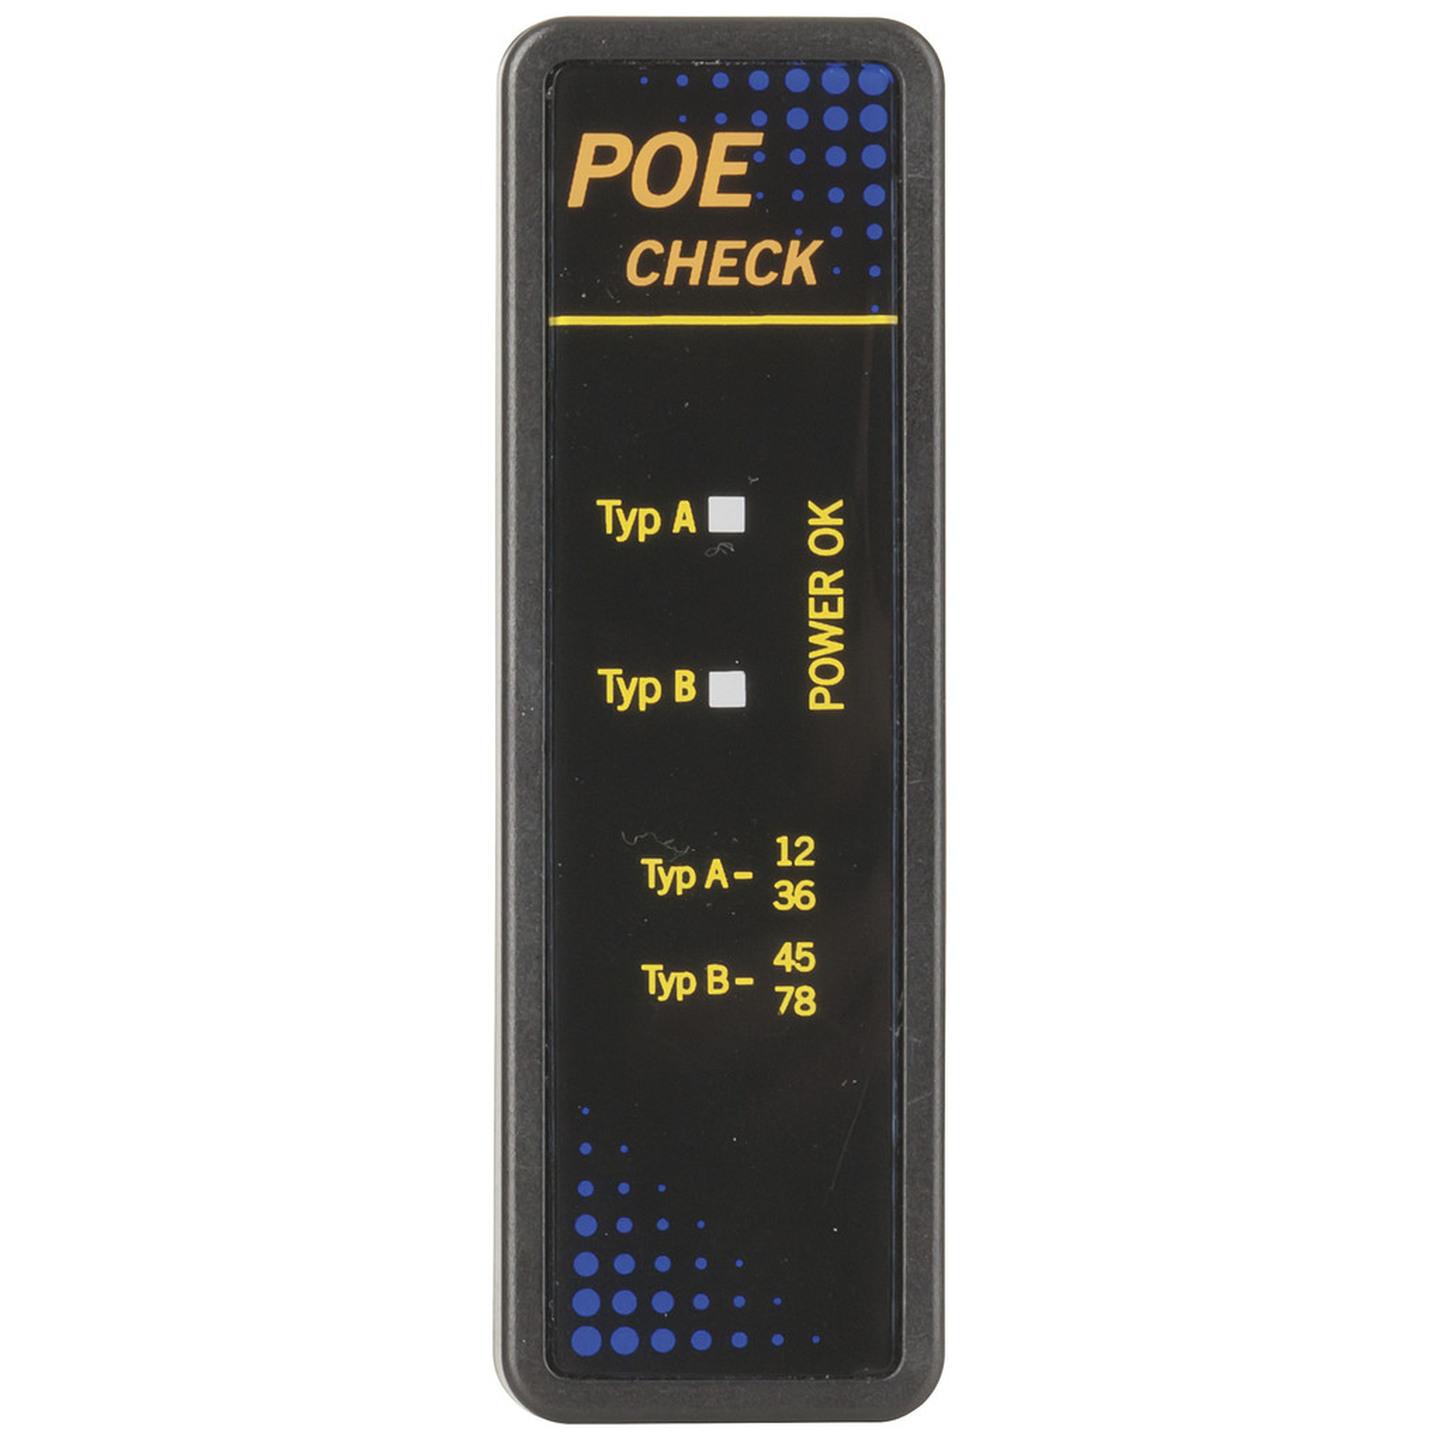 Mini Network Cable Tester with POE Finder